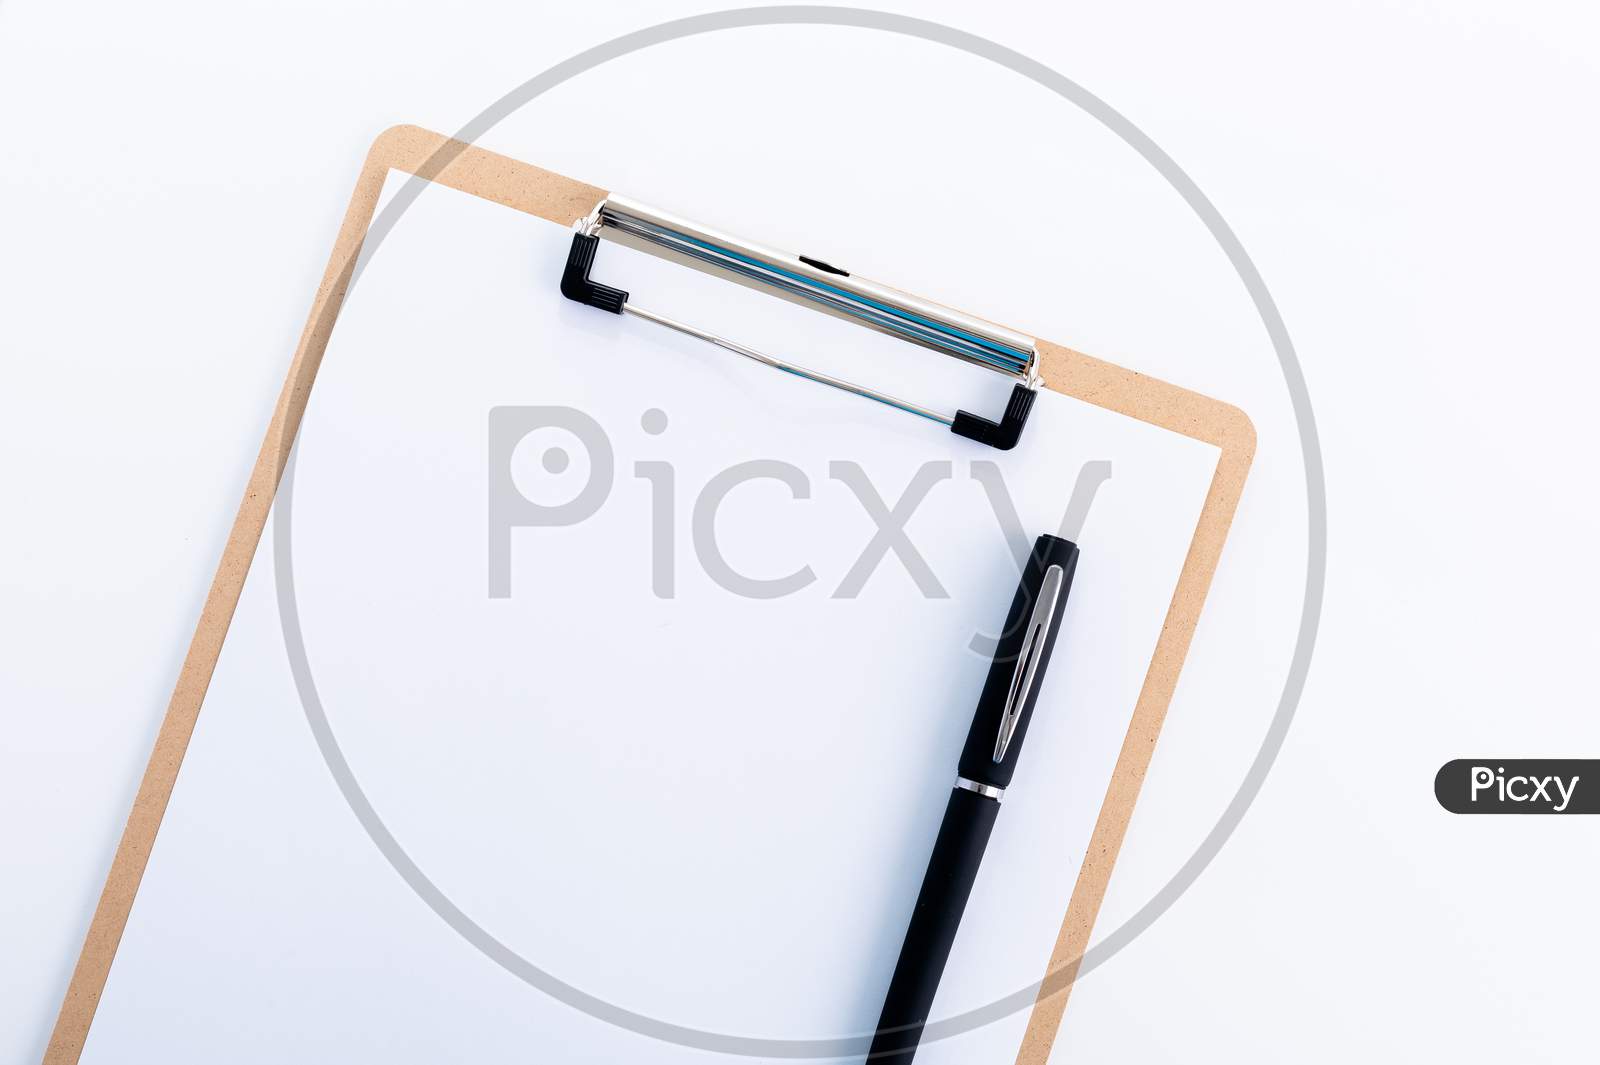 Blank Paper On Wooden Clipboard With Pen On Space On Background, Copy Space